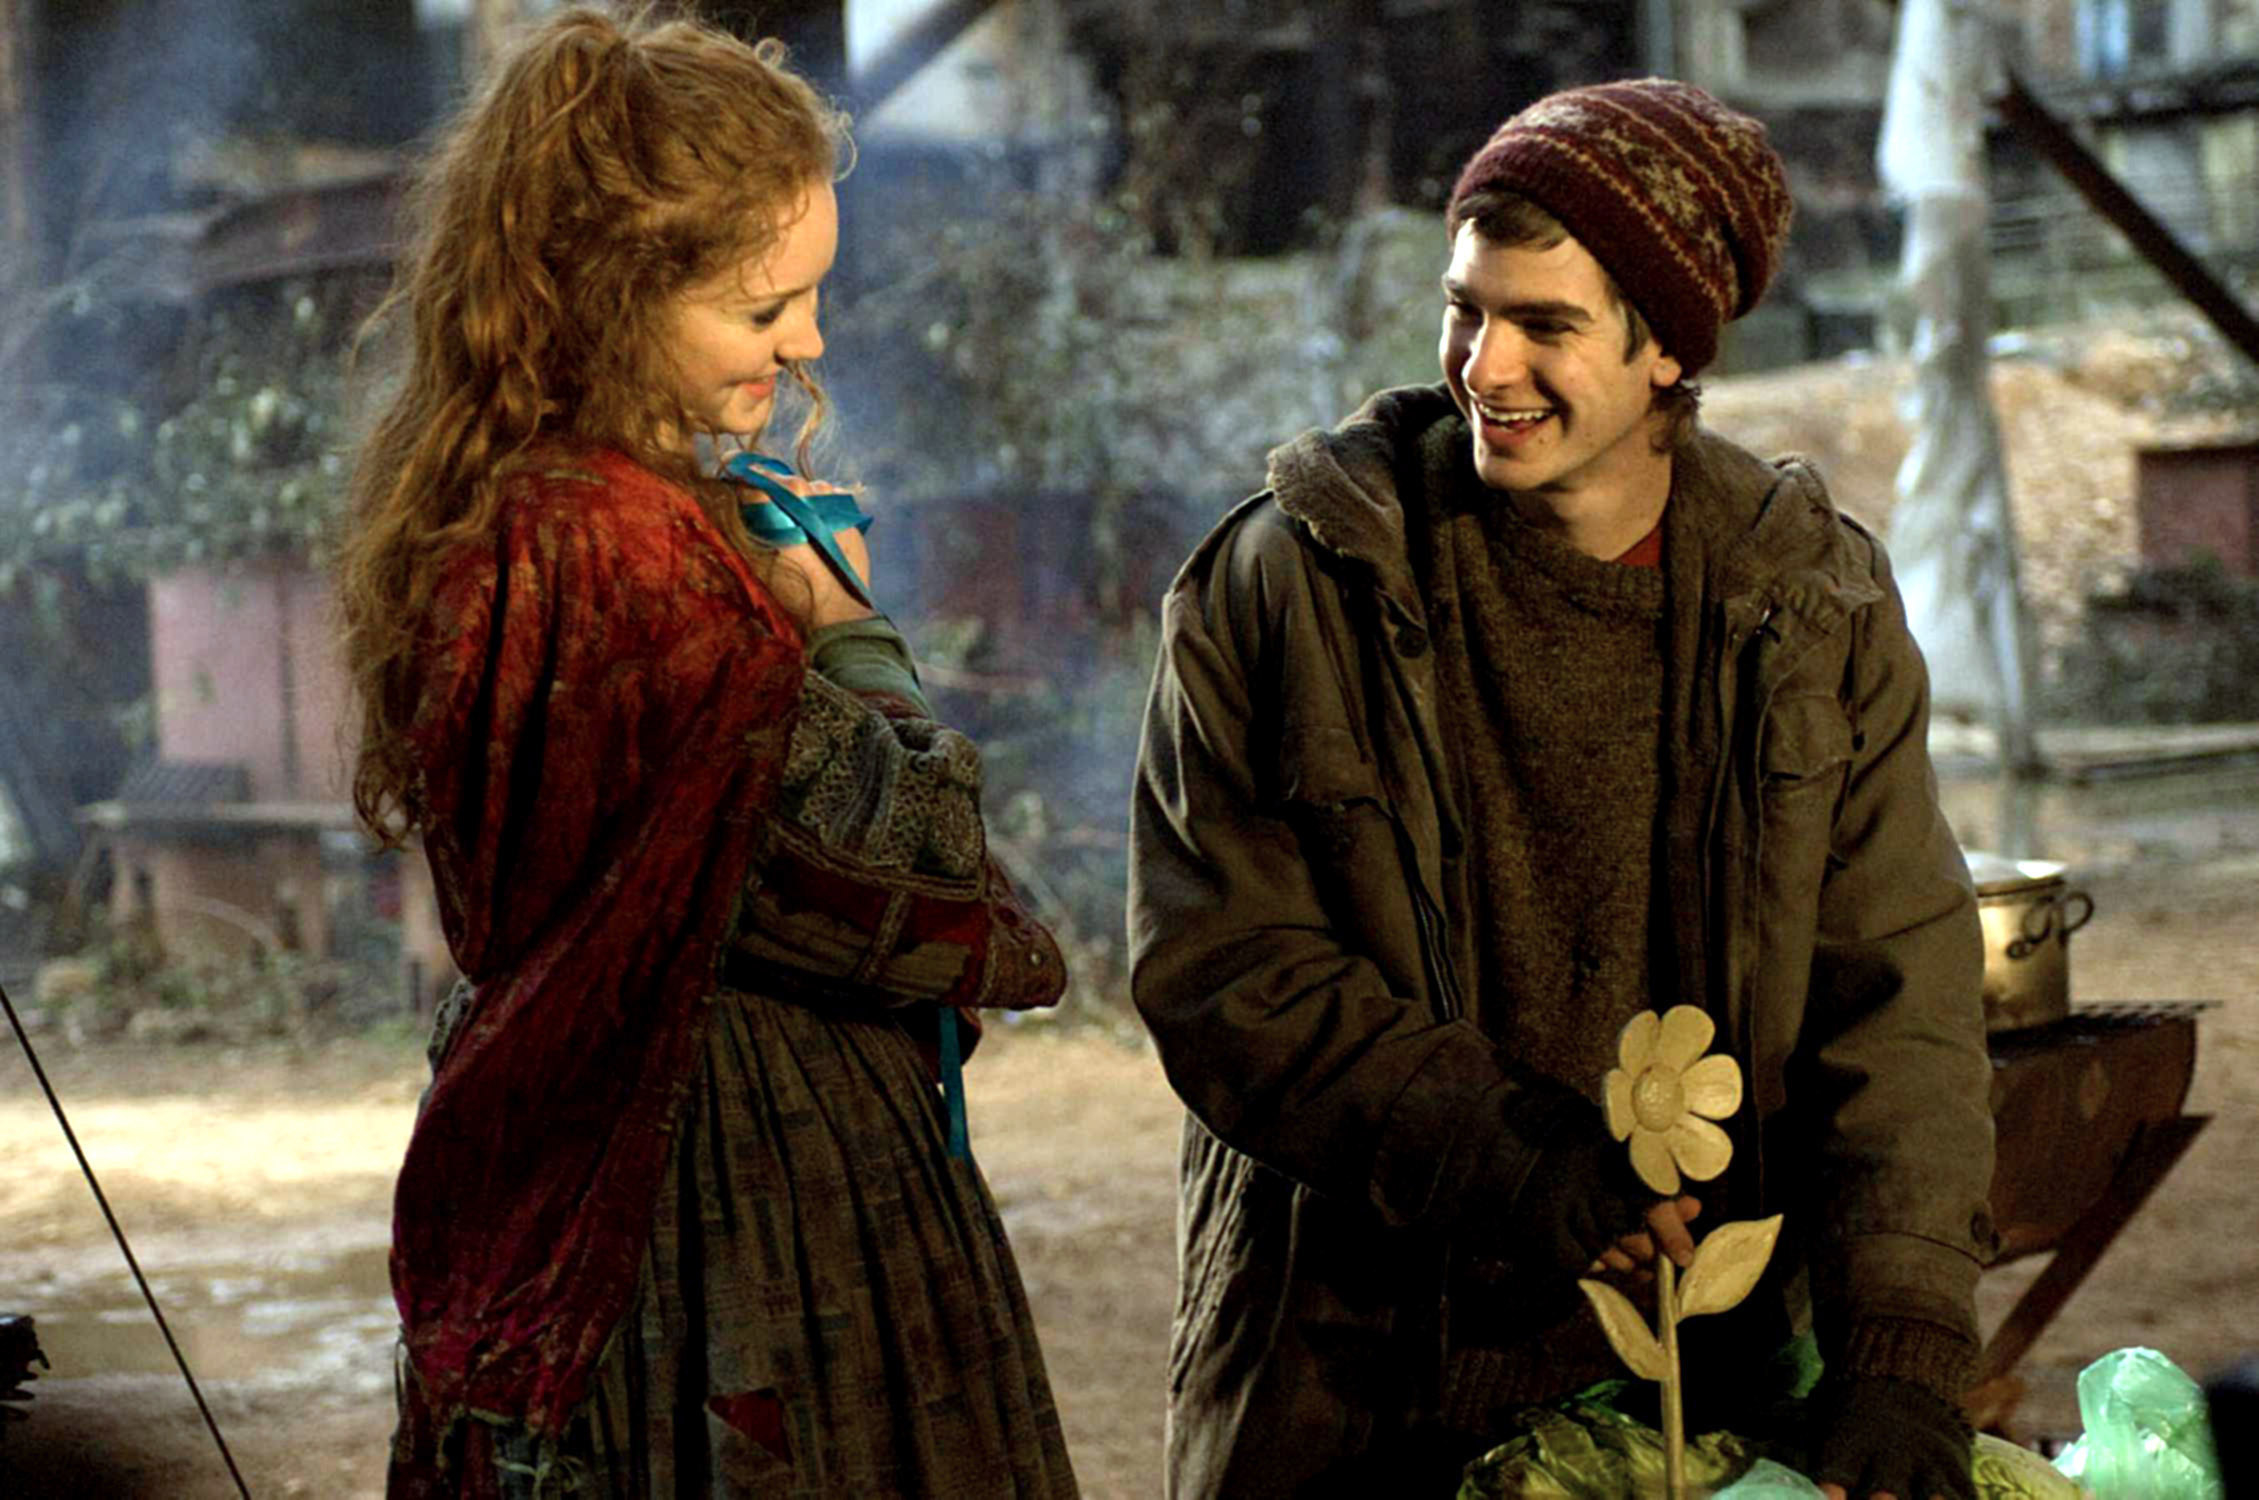 Lily Cole and Andrew Garfield laugh together